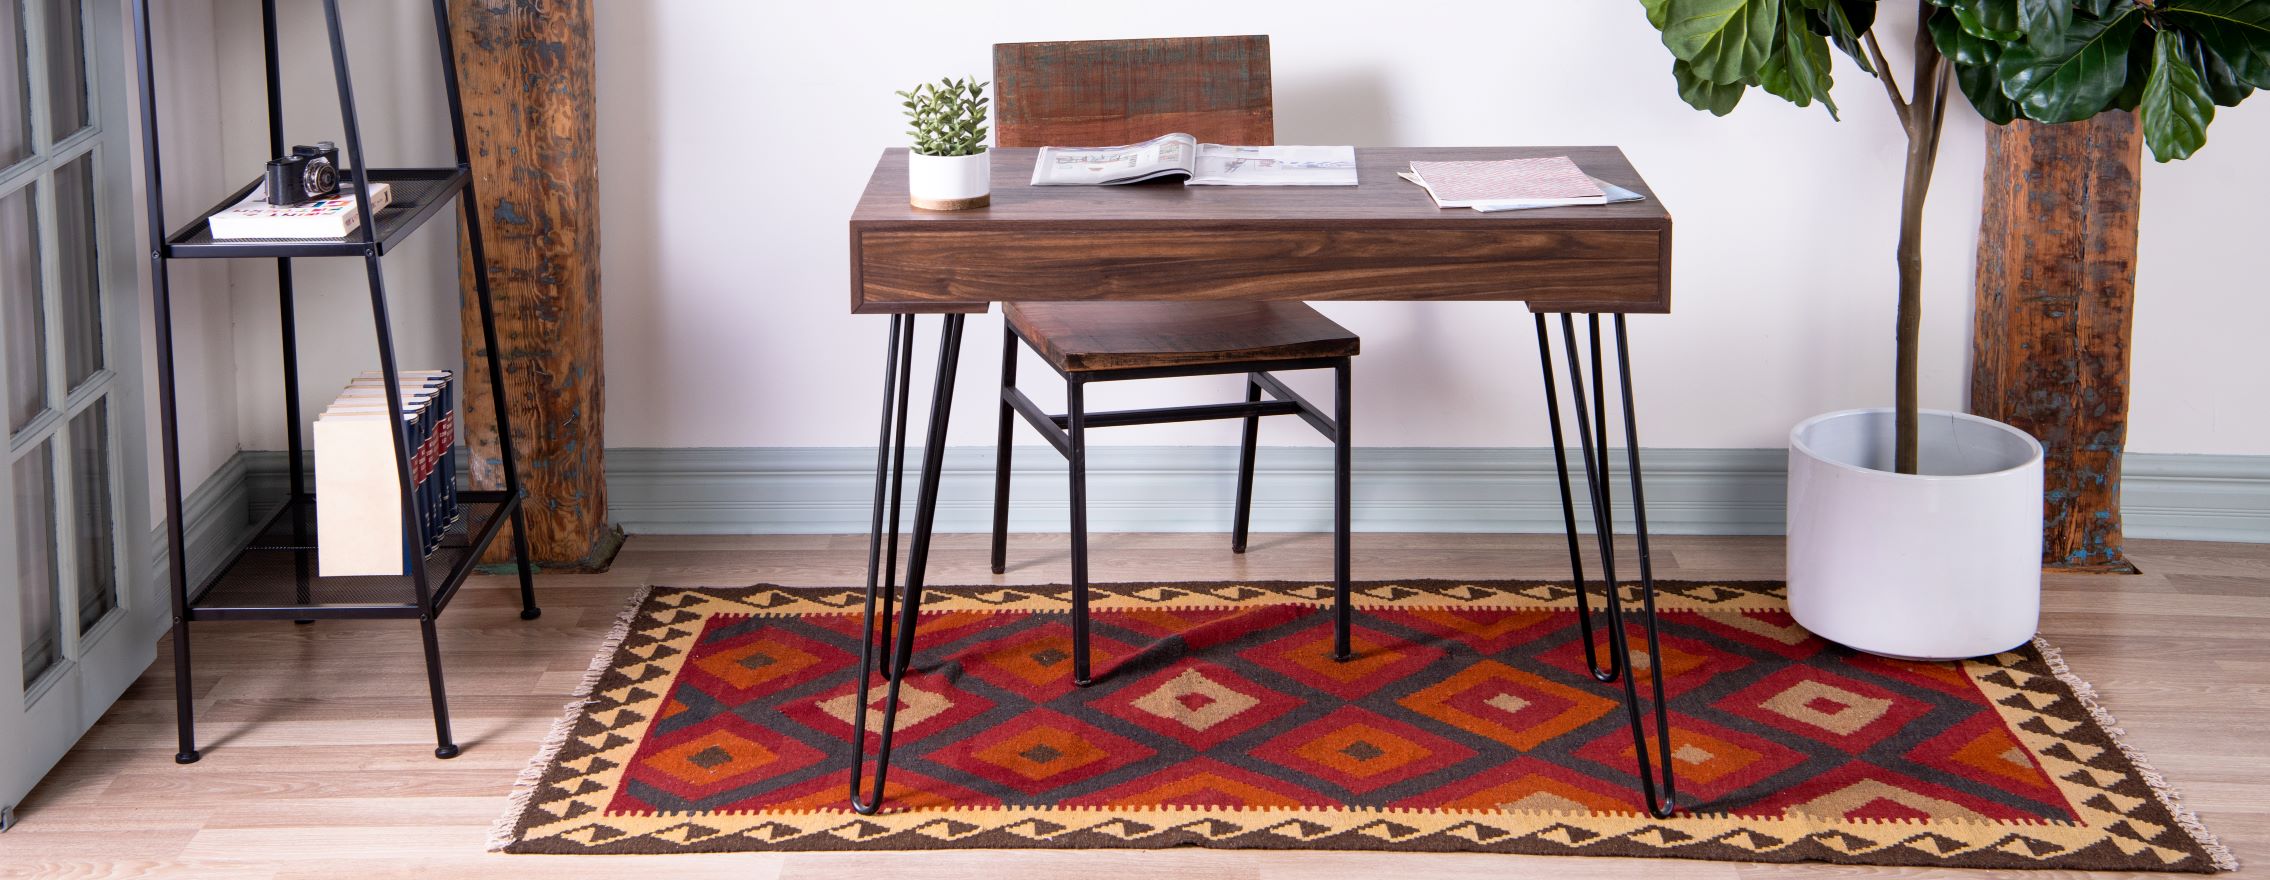 Ultimate Rug Size Guide: Choosing The Perfect Rug For Your Space